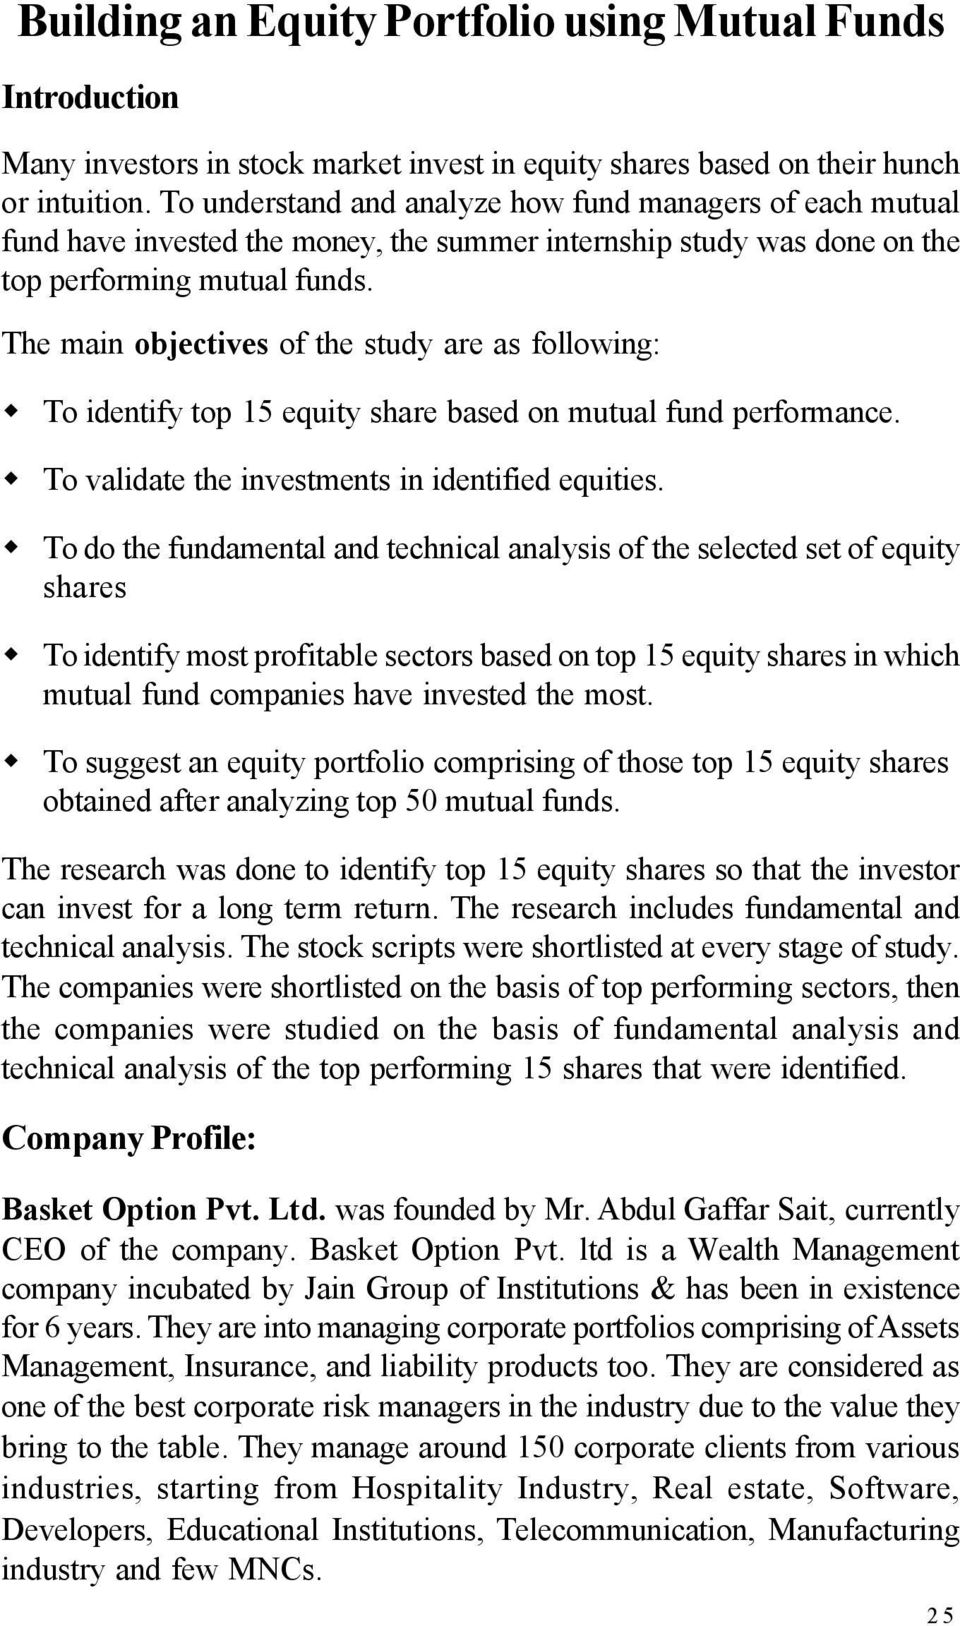 The main objectives of the study are as following: To identify top 15 equity share based on mutual fund performance. To validate the investments in identified equities.